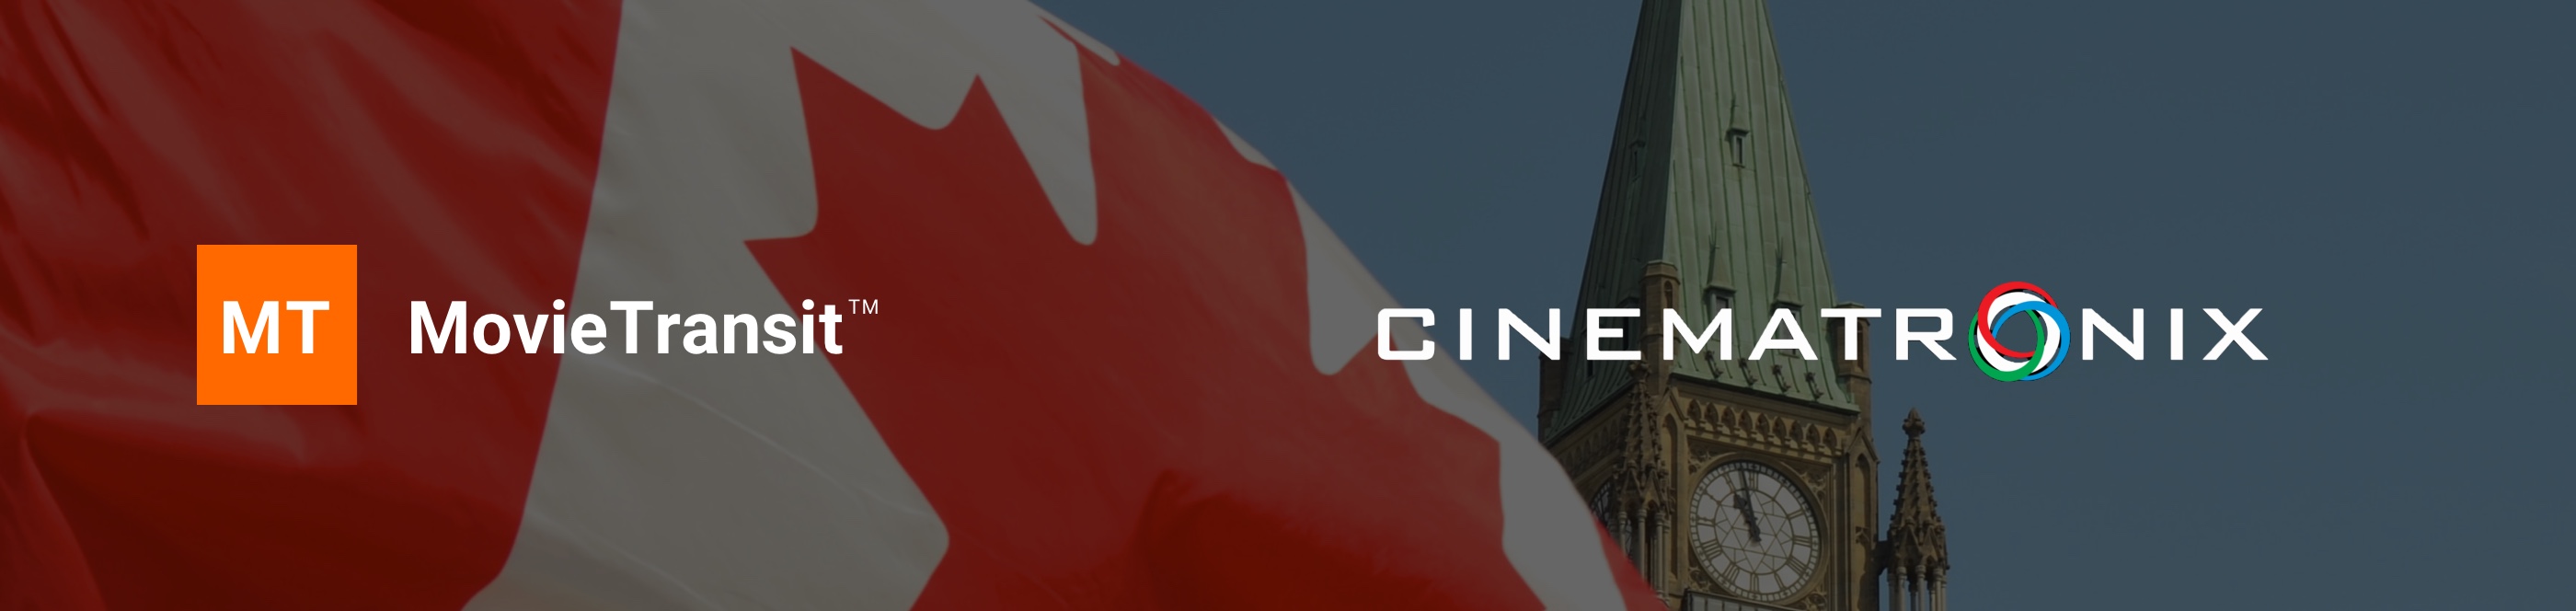 Unique X Partners With Cinematronix To Provide Content Delivery Services In Canada